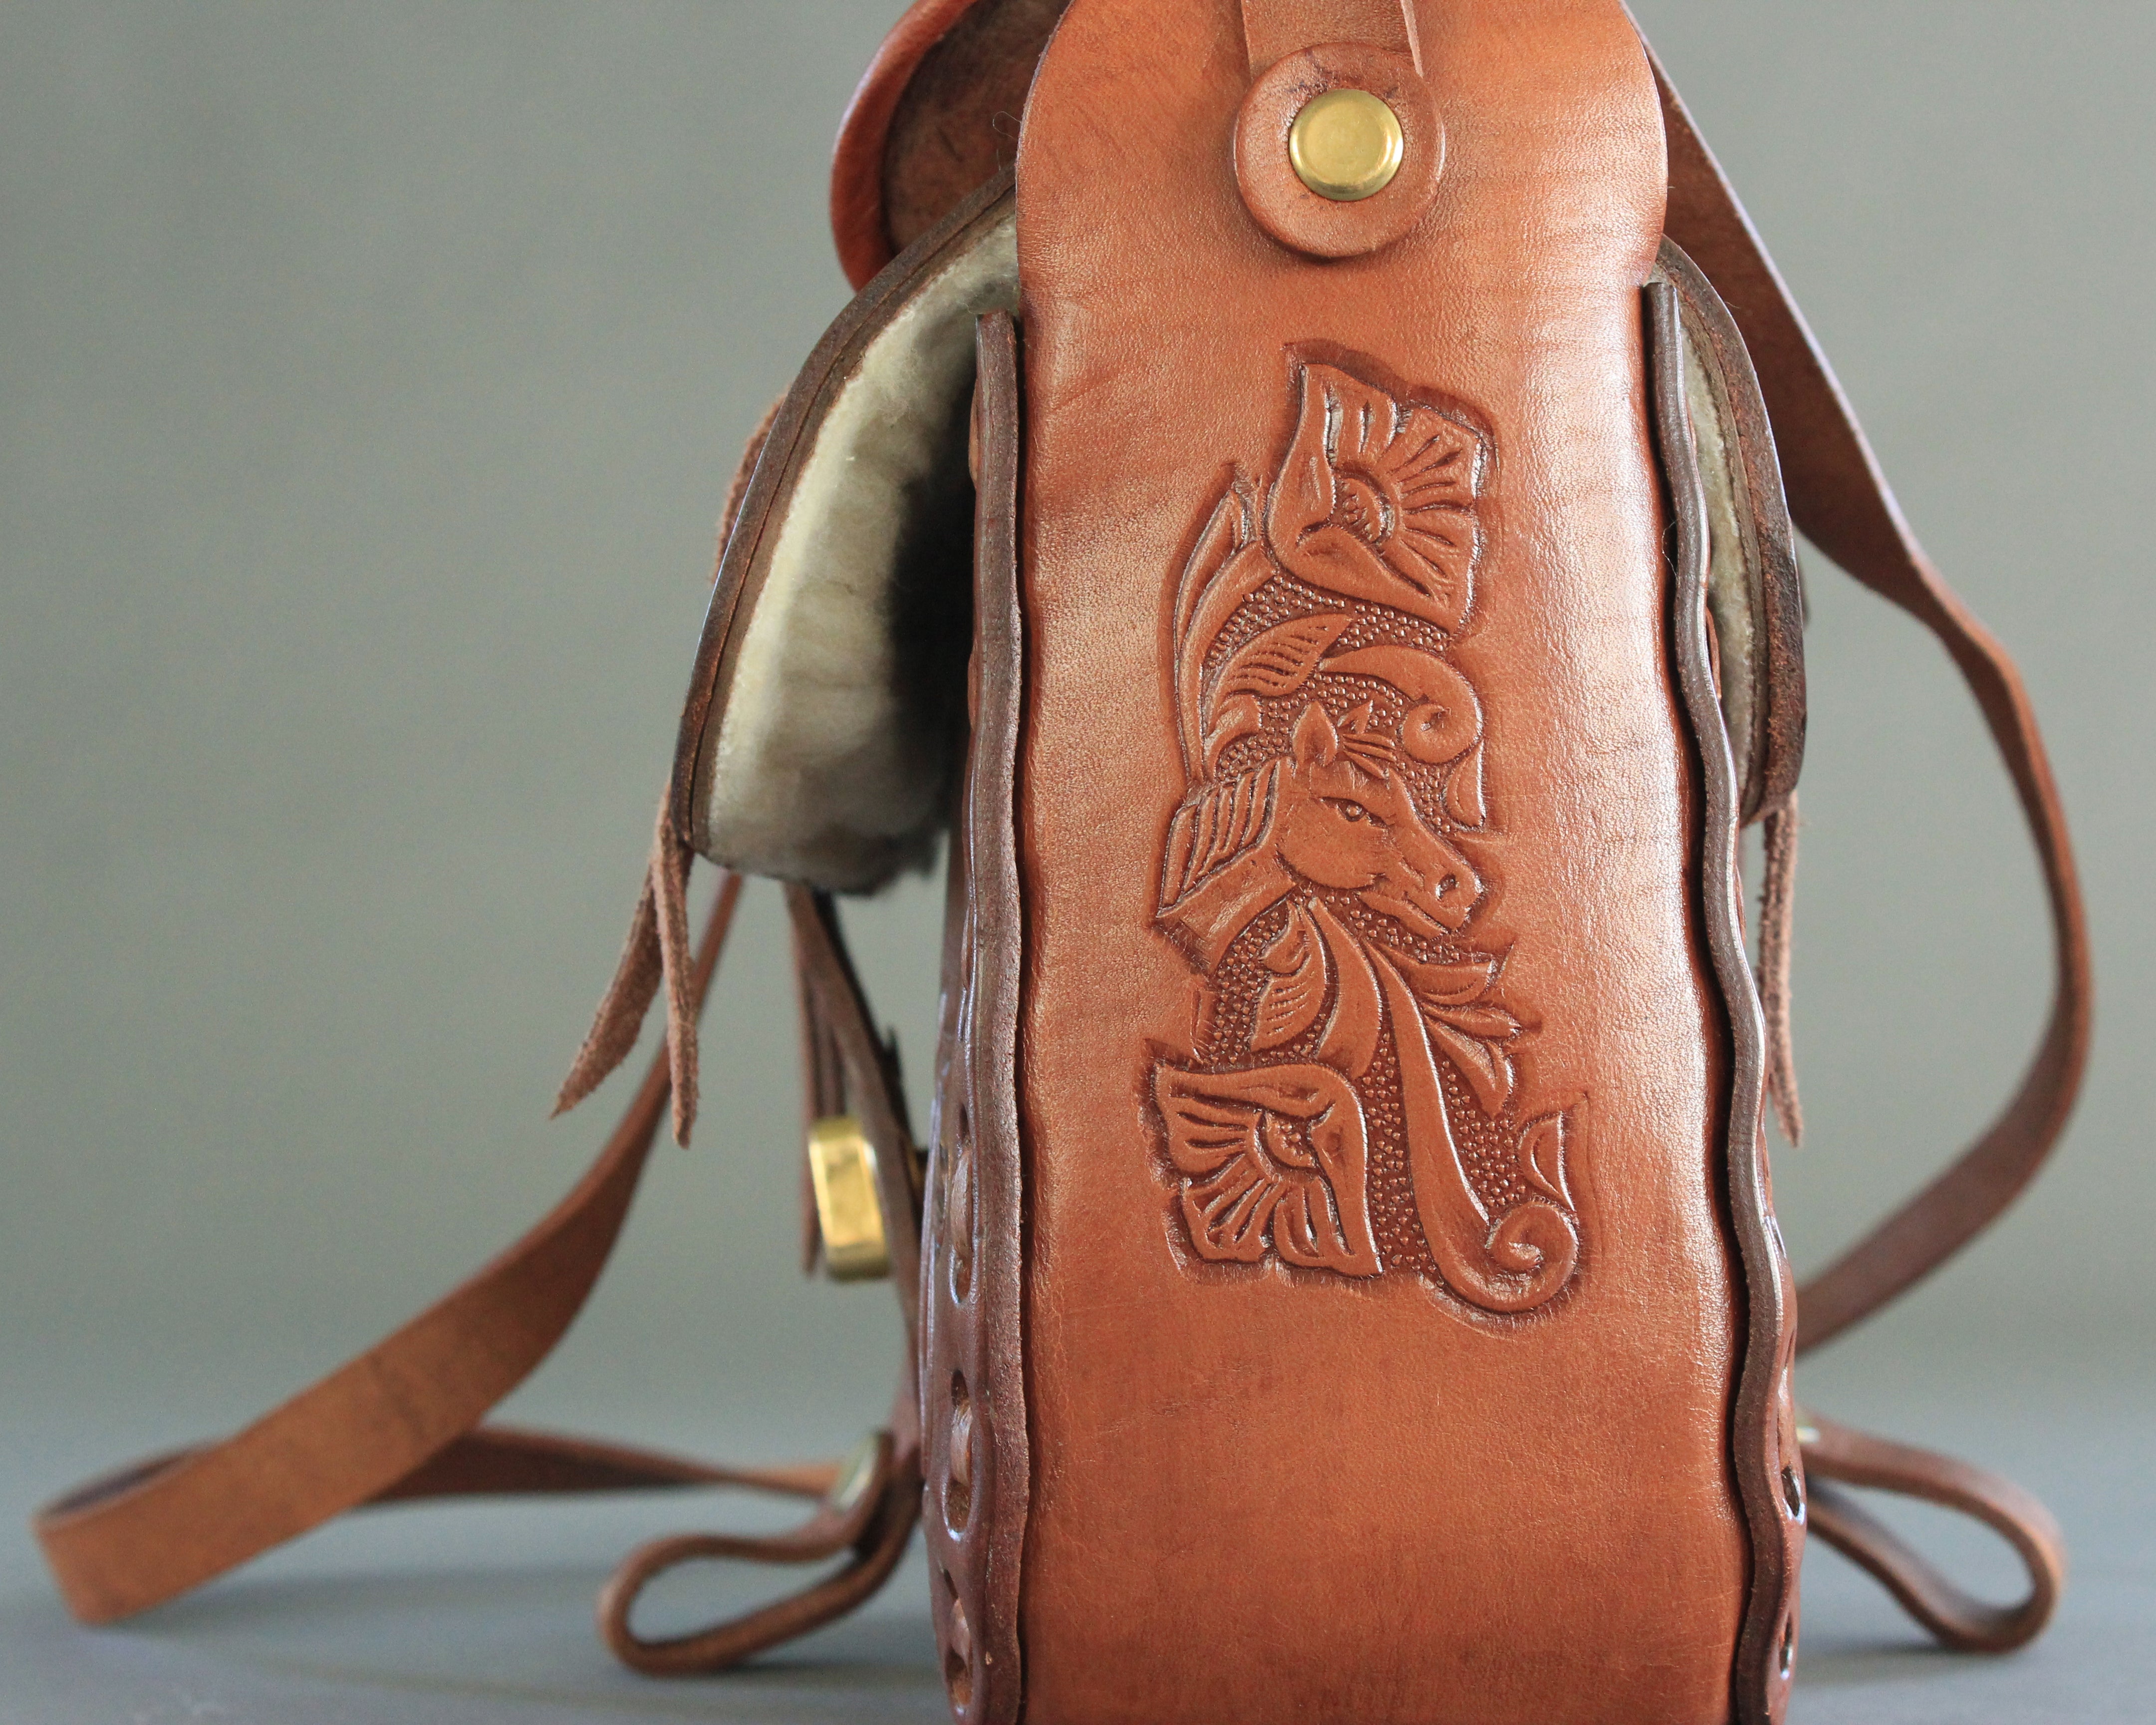 Western purse with real saddle on top